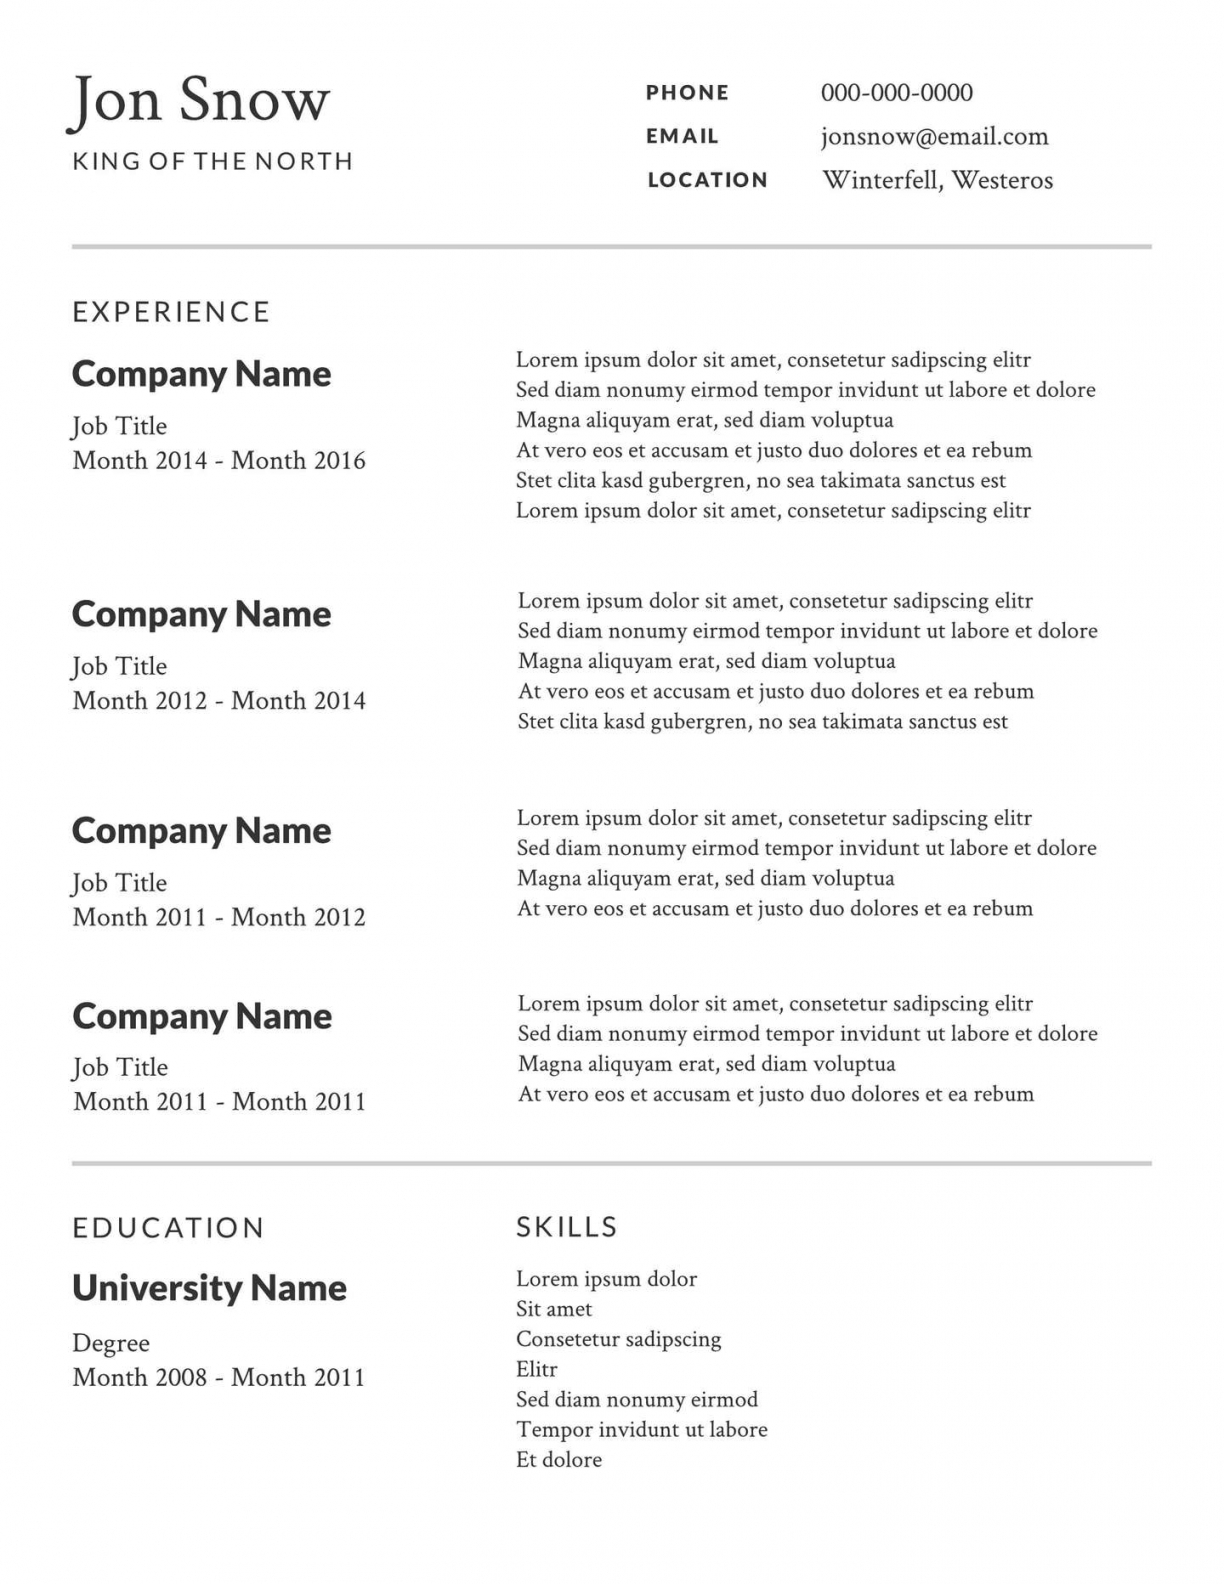 Resume Templates Examples Free